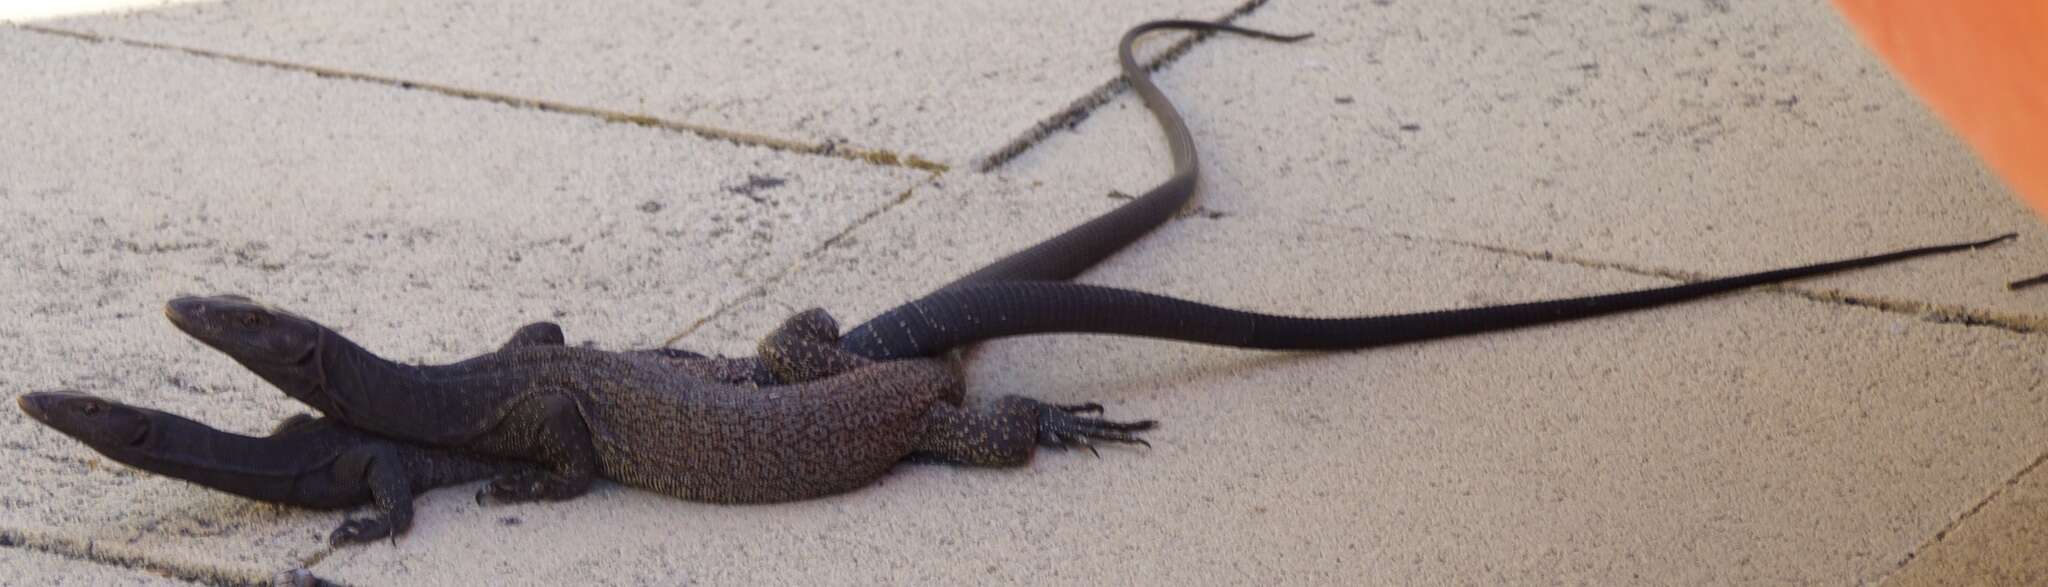 Image of (E) Freckled Monitor